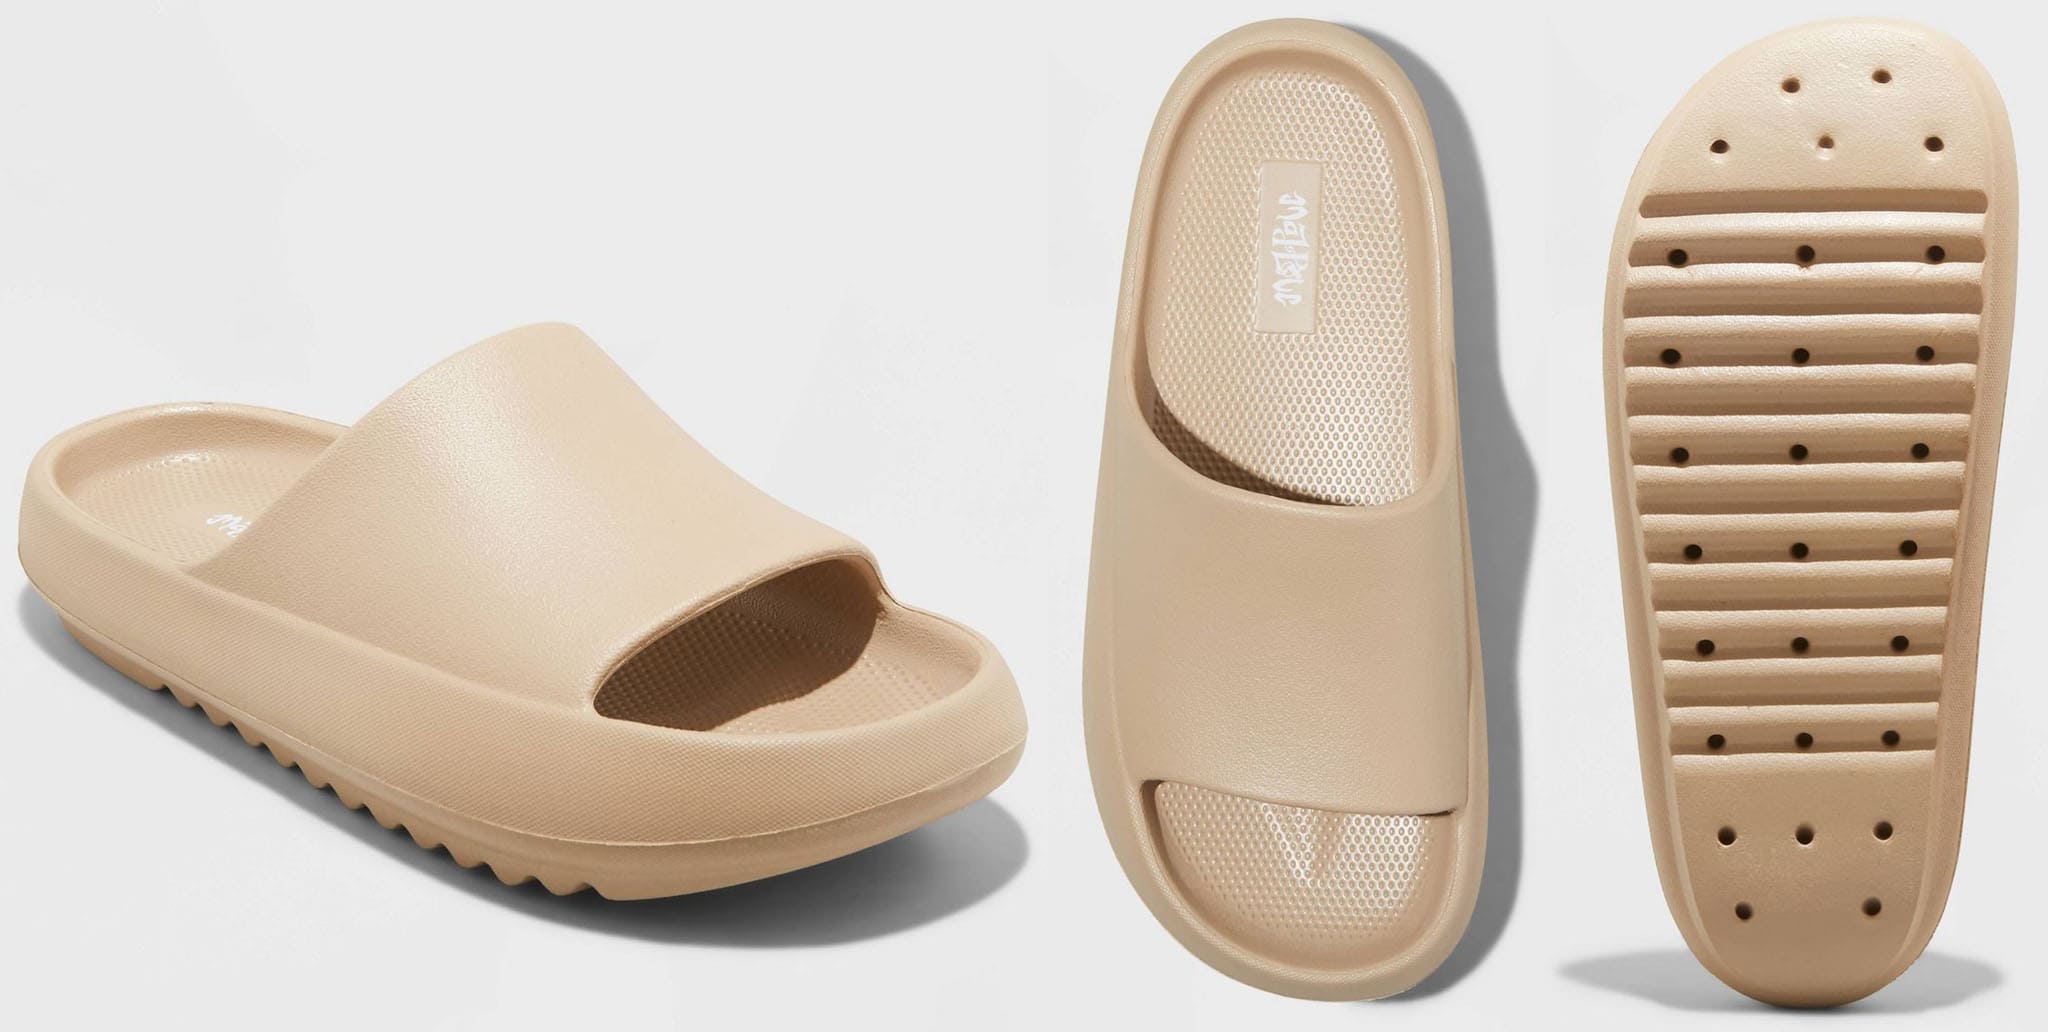 Why Reviewers Love eva yeezy Target's Yeezy Slide Dupes